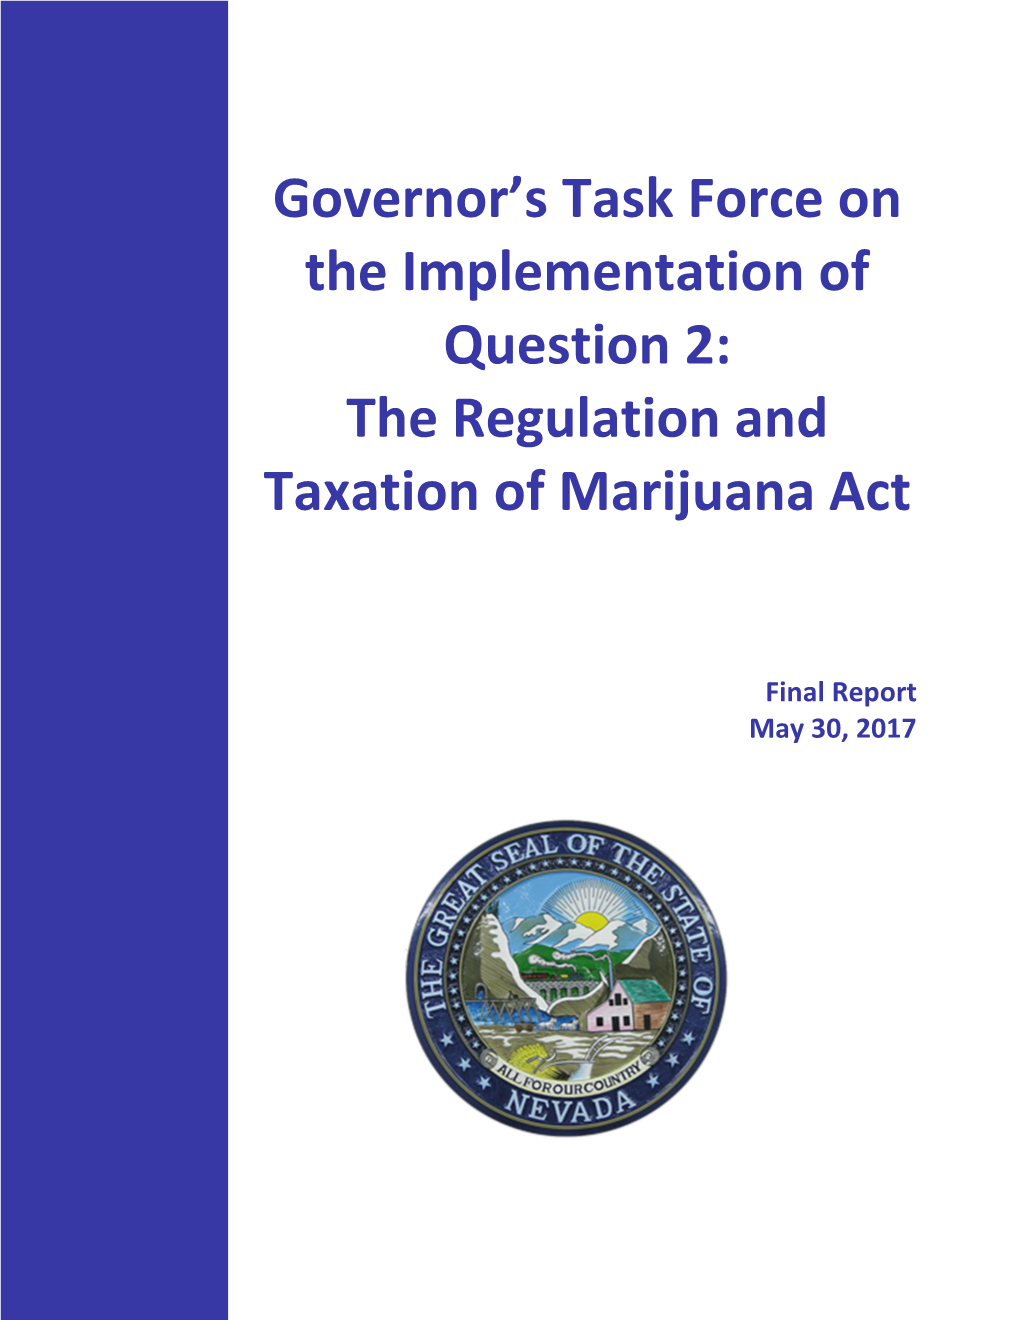 Governor's Task Force on the Implementation of Question 2